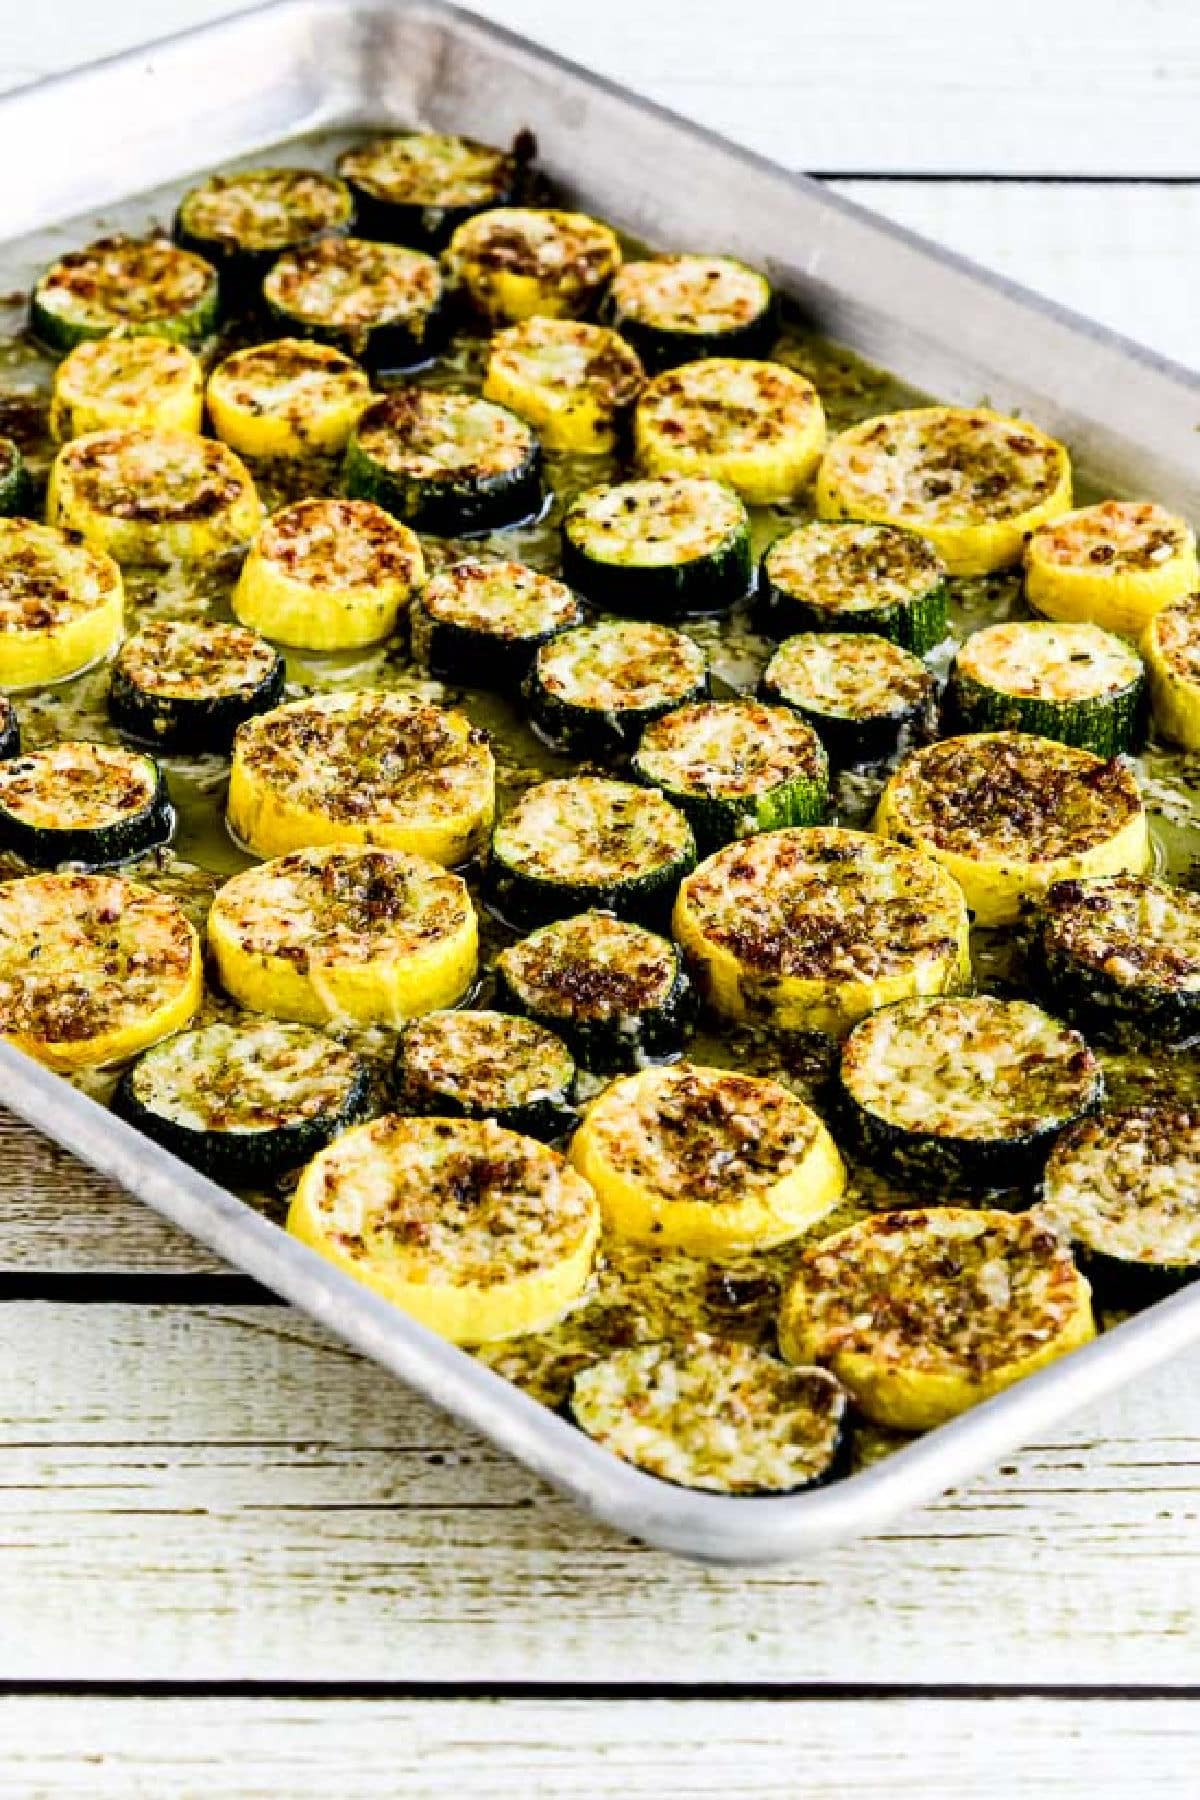 Summer squash with pesto sauce and parmesan cheese on a baking sheet on a wooden background